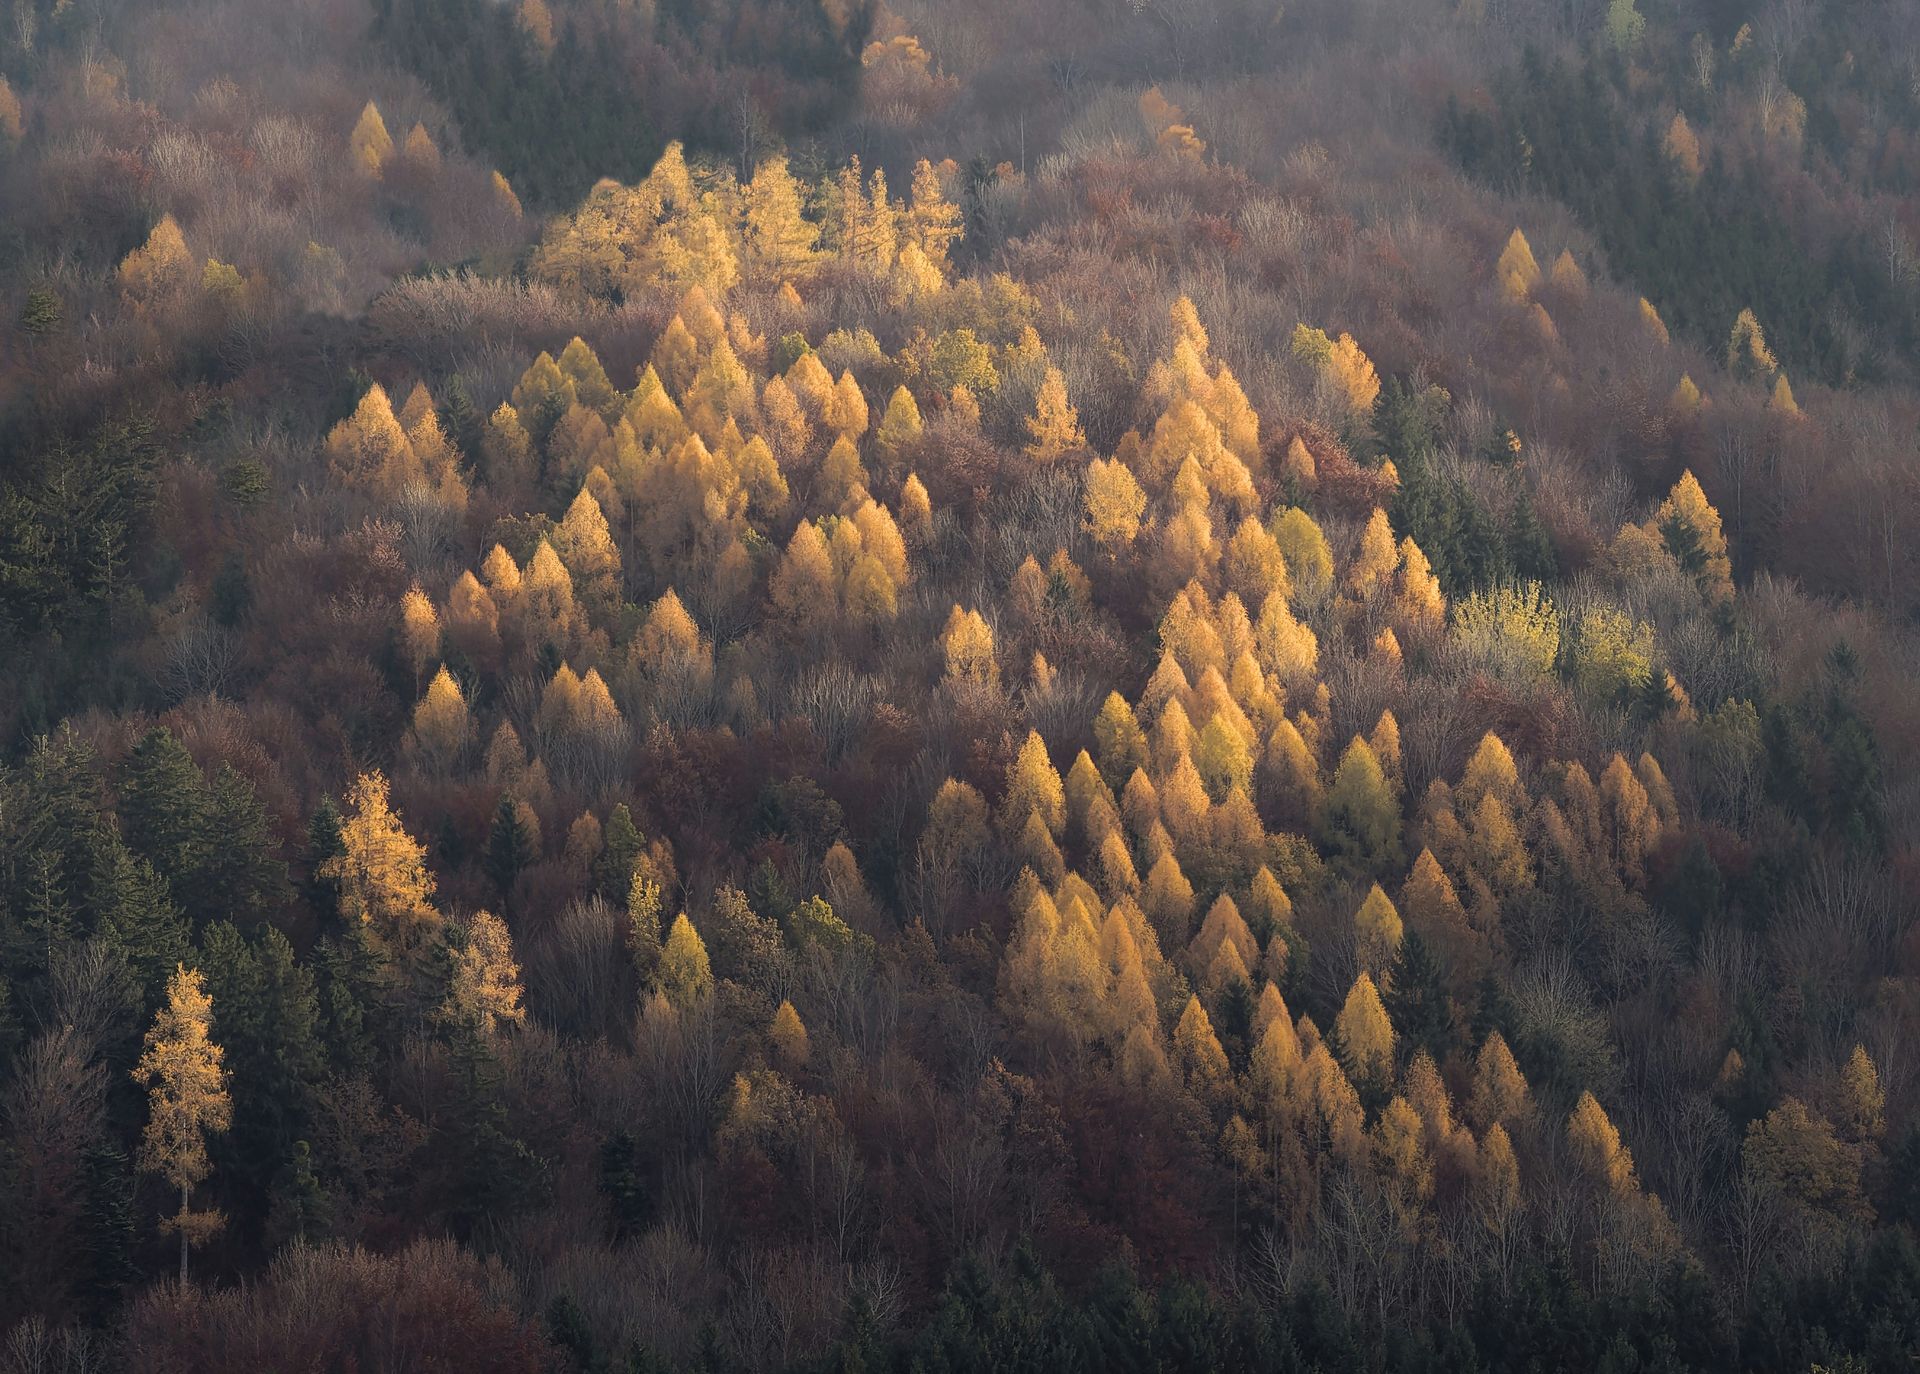 A smattering of light colored trees fill the surrounding forest with beauty